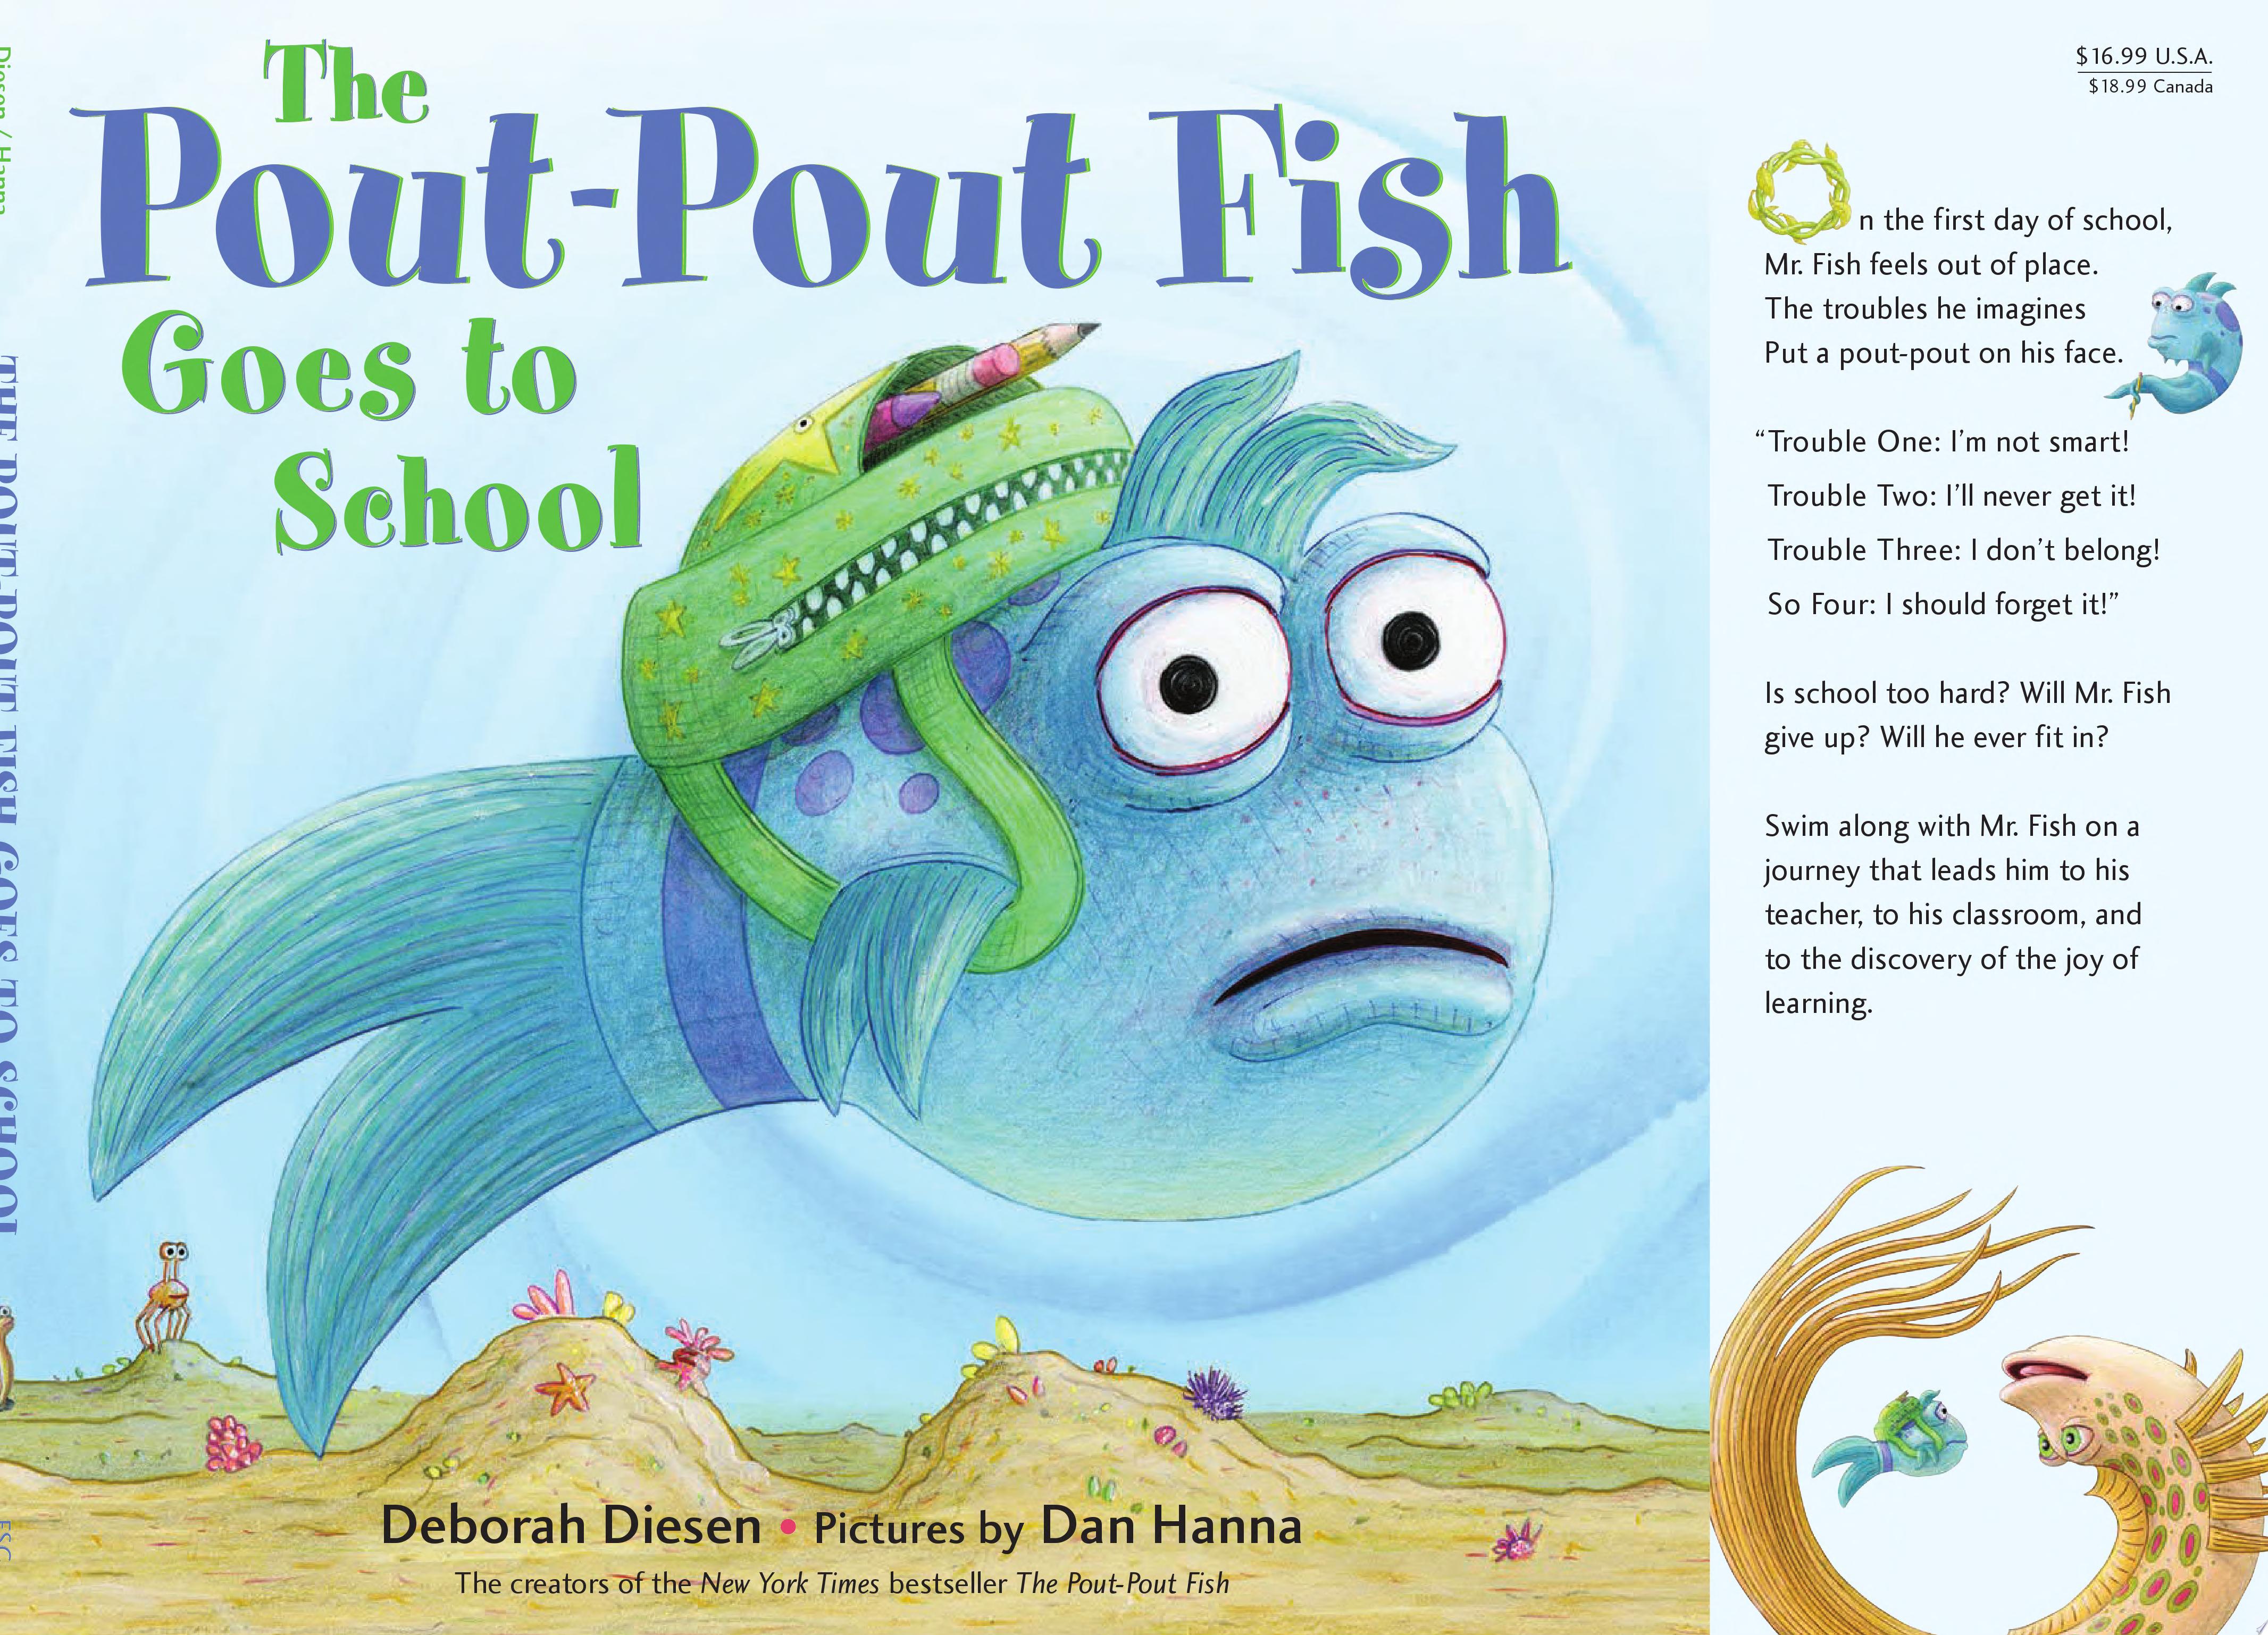 Image for "The Pout-Pout Fish Goes to School"